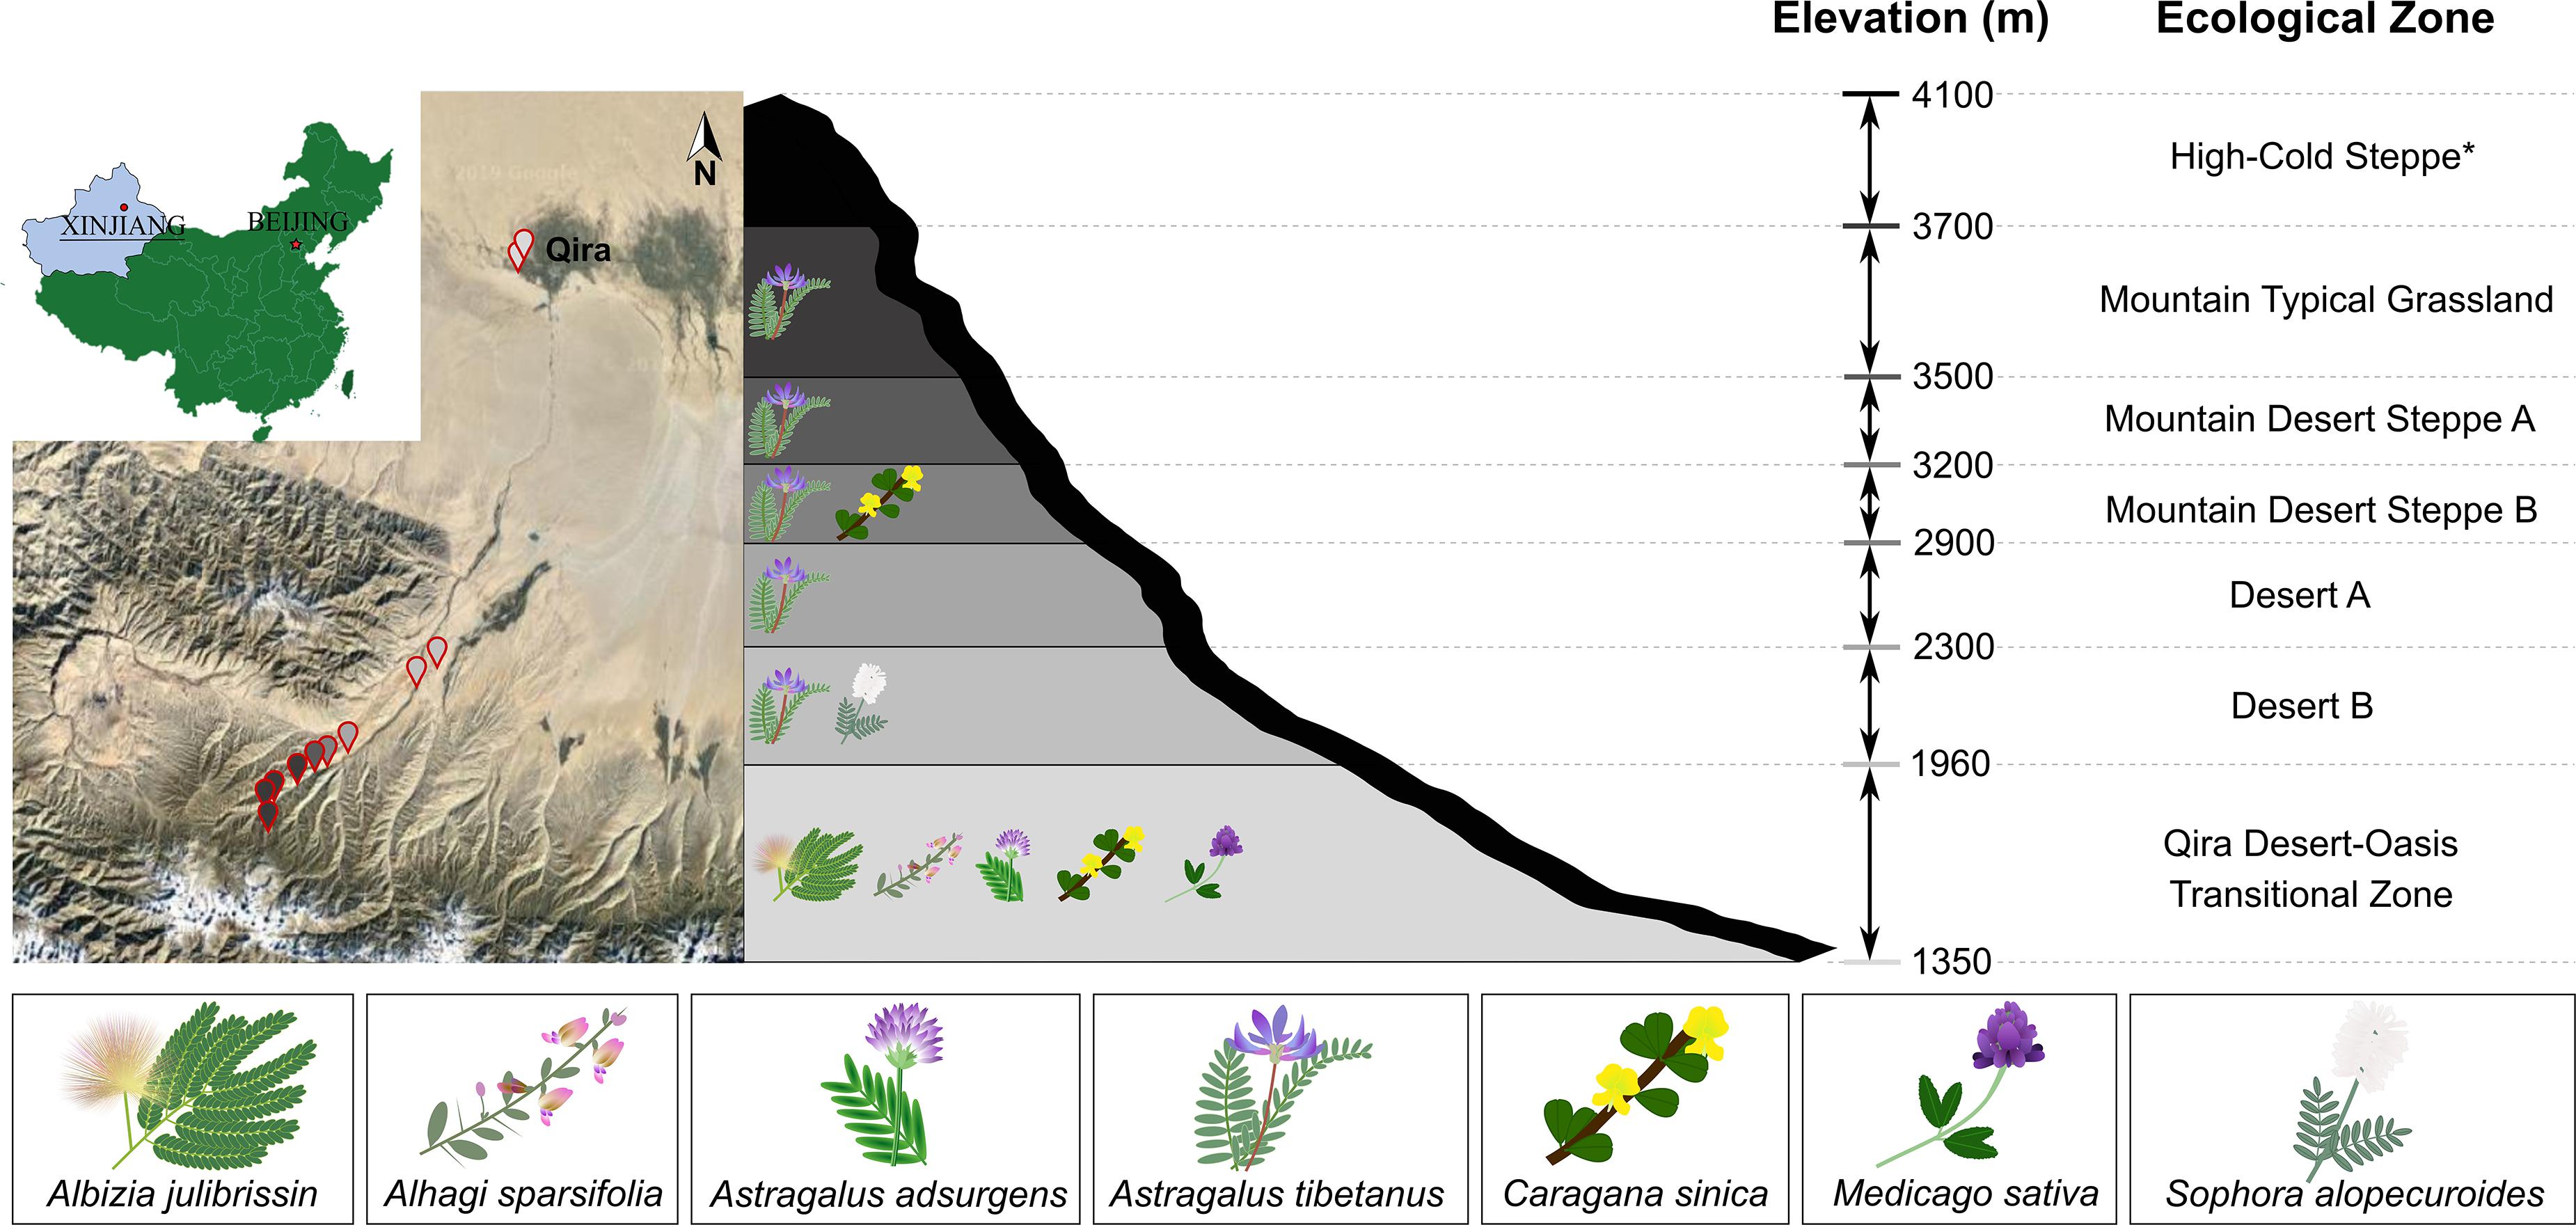 Frontiers Diversity Of Root Nodule Associated Bacteria Of Diverse Legumes Along An Elevation Gradient In The Kunlun Mountains China Microbiology